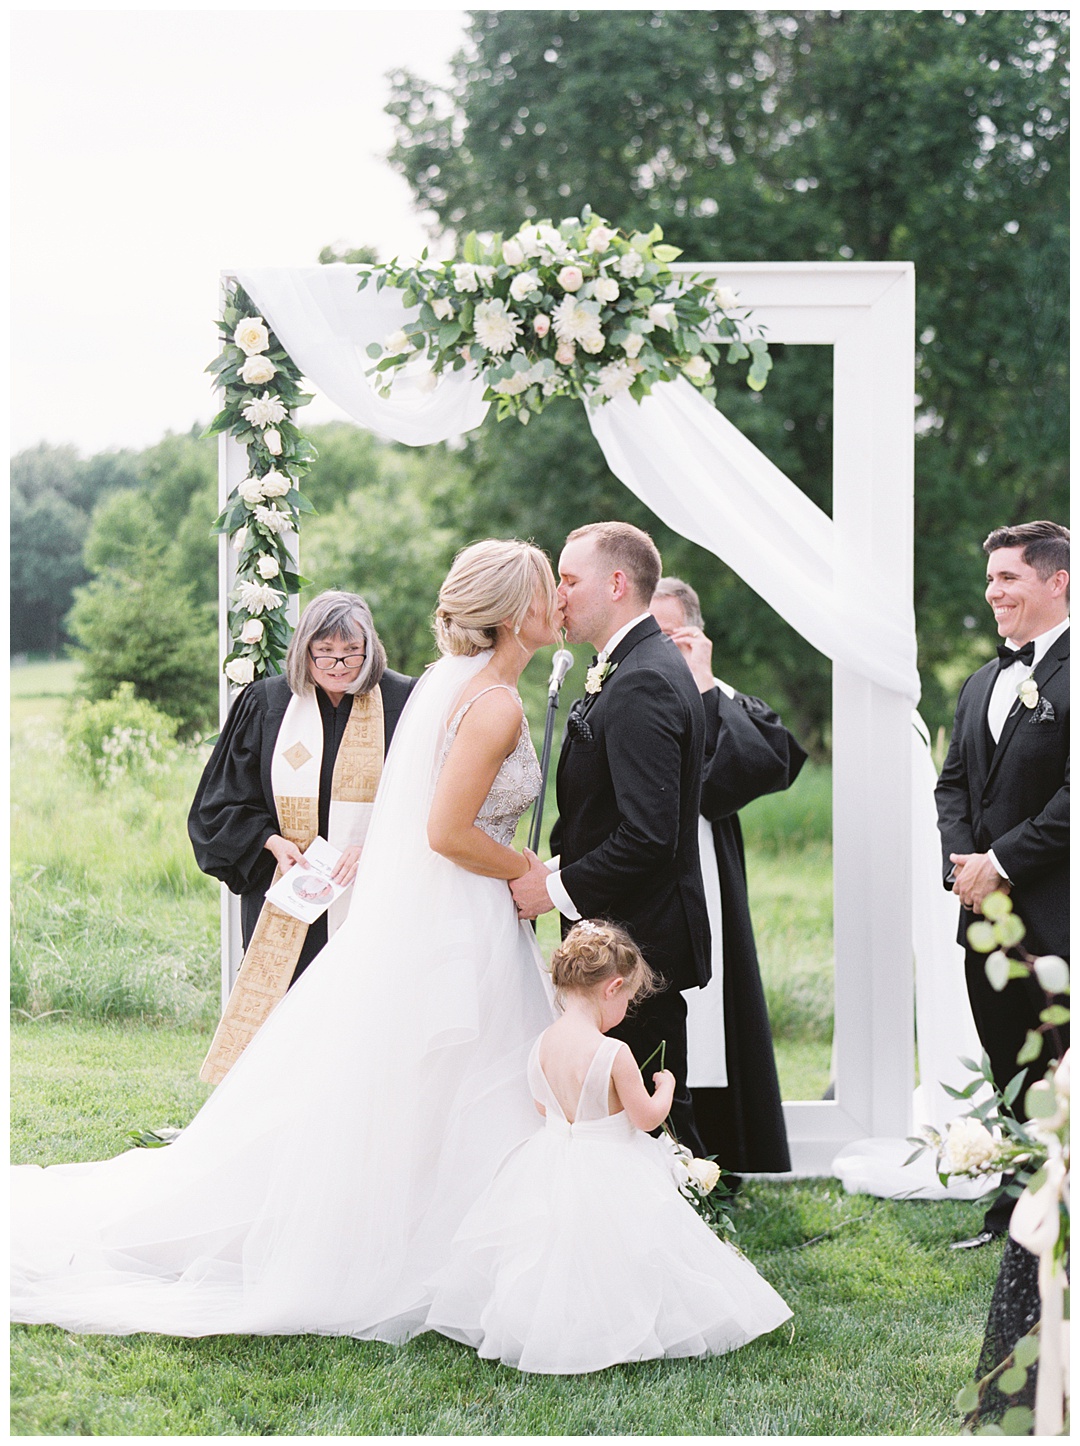 First Kiss Lush Backyard Wedding on Film Featured on Magnolia Rouge with Sarah Sunstrom Photography